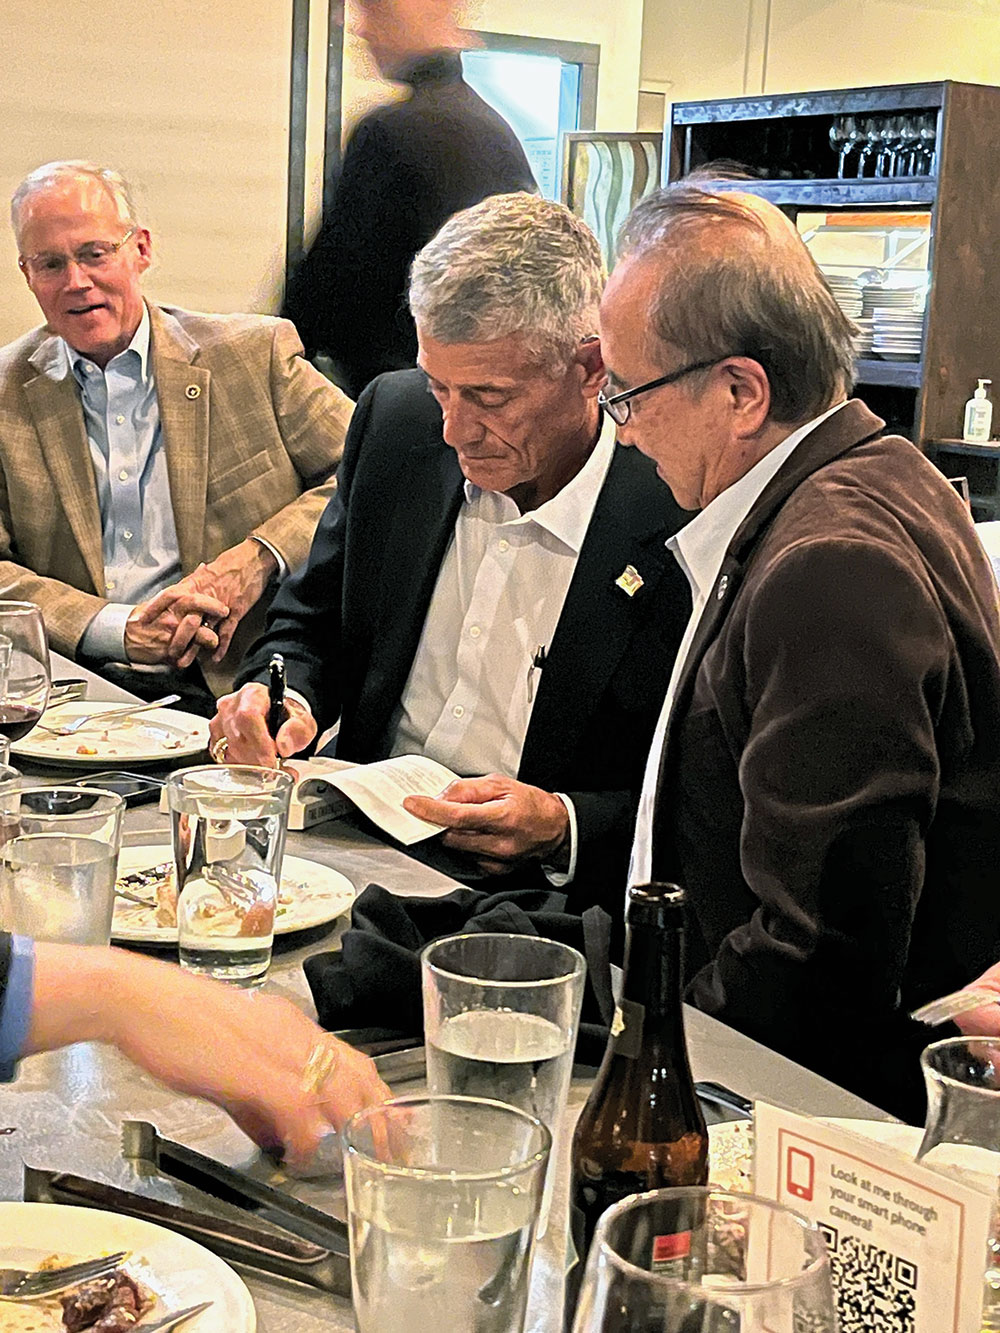 Lt. Gen. (Ret.) Robert L. Caslen, Jr., former Fort Leavenworth commander/CGSC commandant, autographs a copy of his book "The Character Edge" for CGSC Foundation Trustee Benny Lee at the Foundation dinner on March 8, 2023. (photo by Lora Morgan, CGSC Foundation)